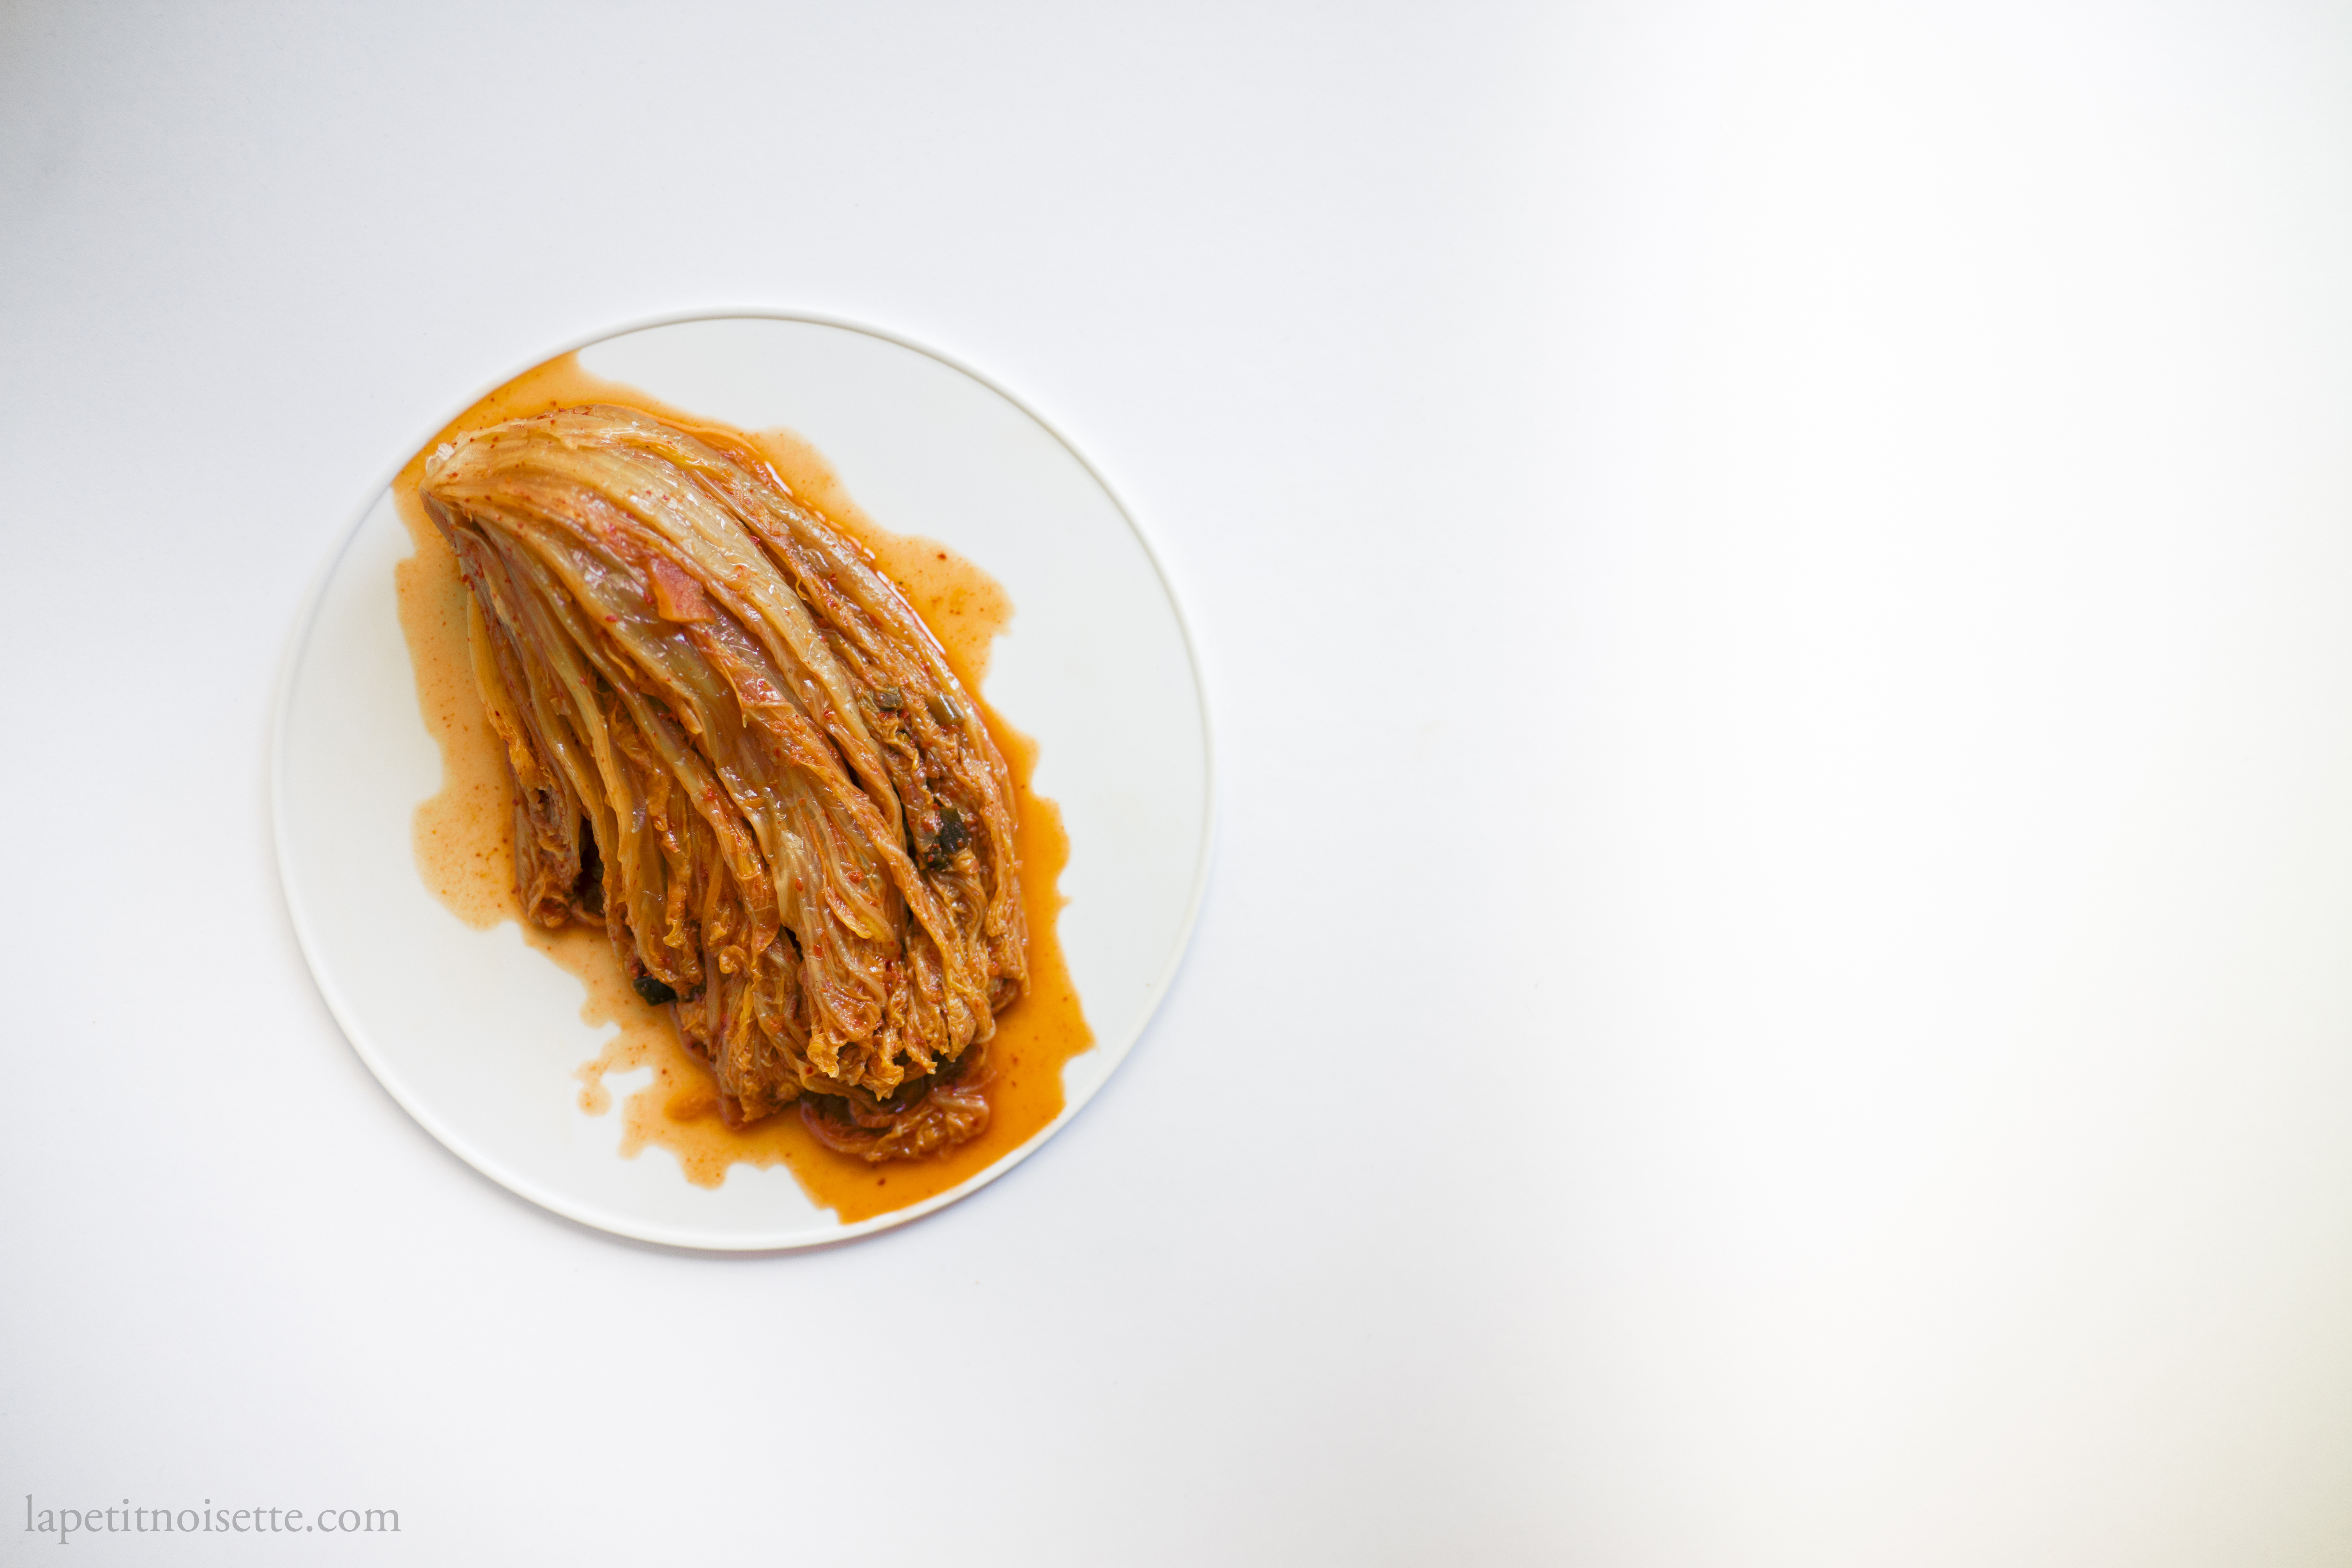 Kimchi aged for two years.